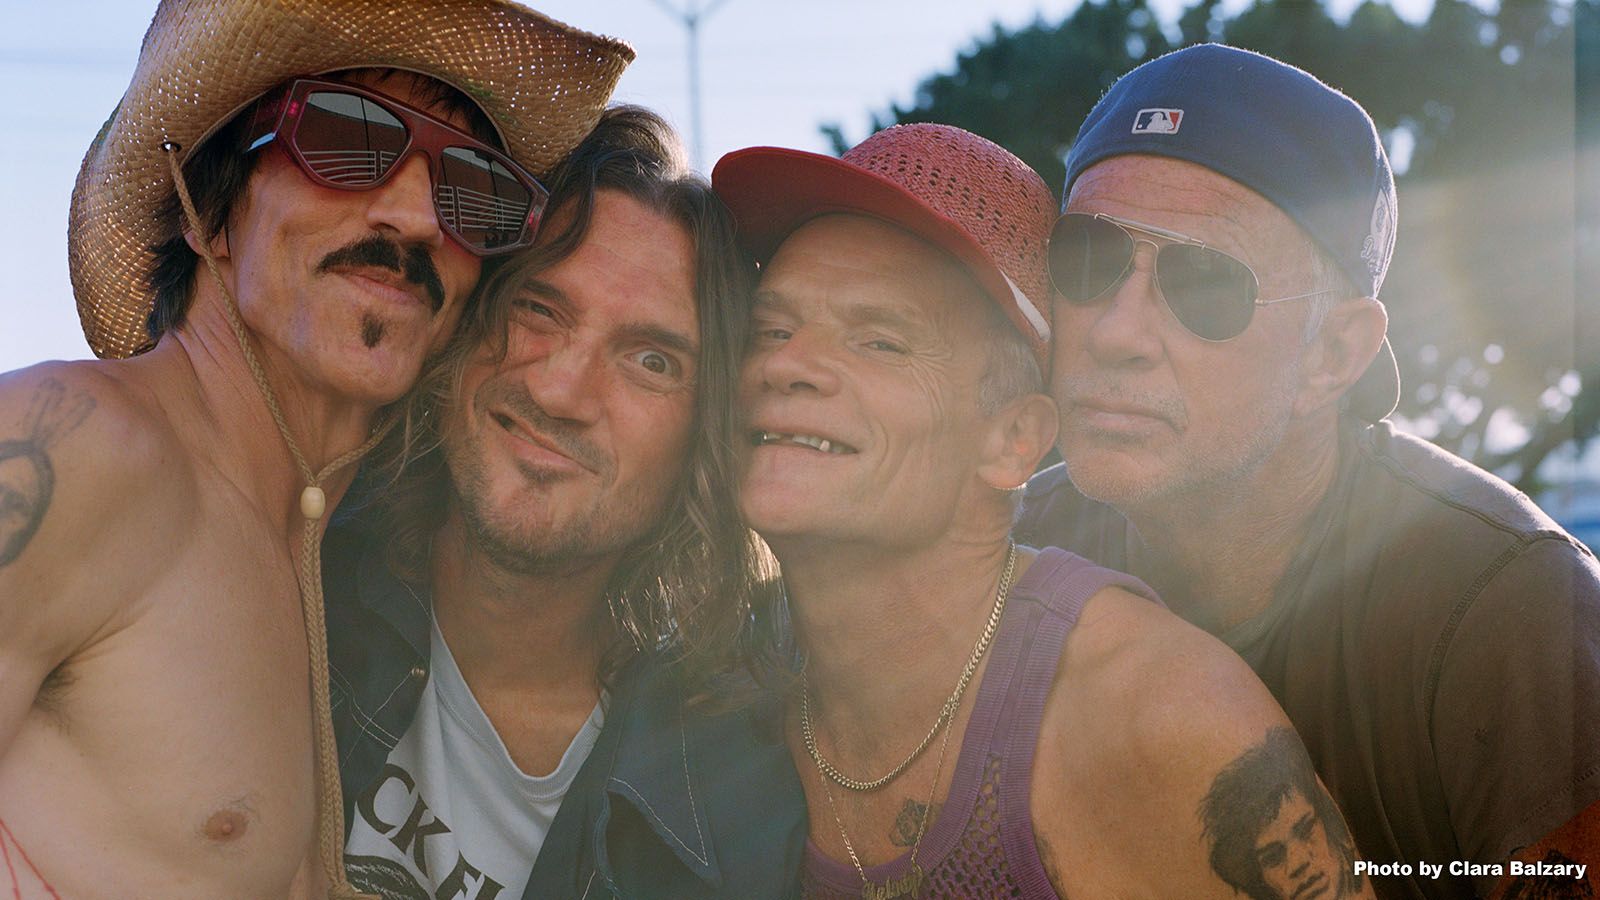 Red Hot Chili Peppers have extended their tour, with Ruoff Music Center being included.